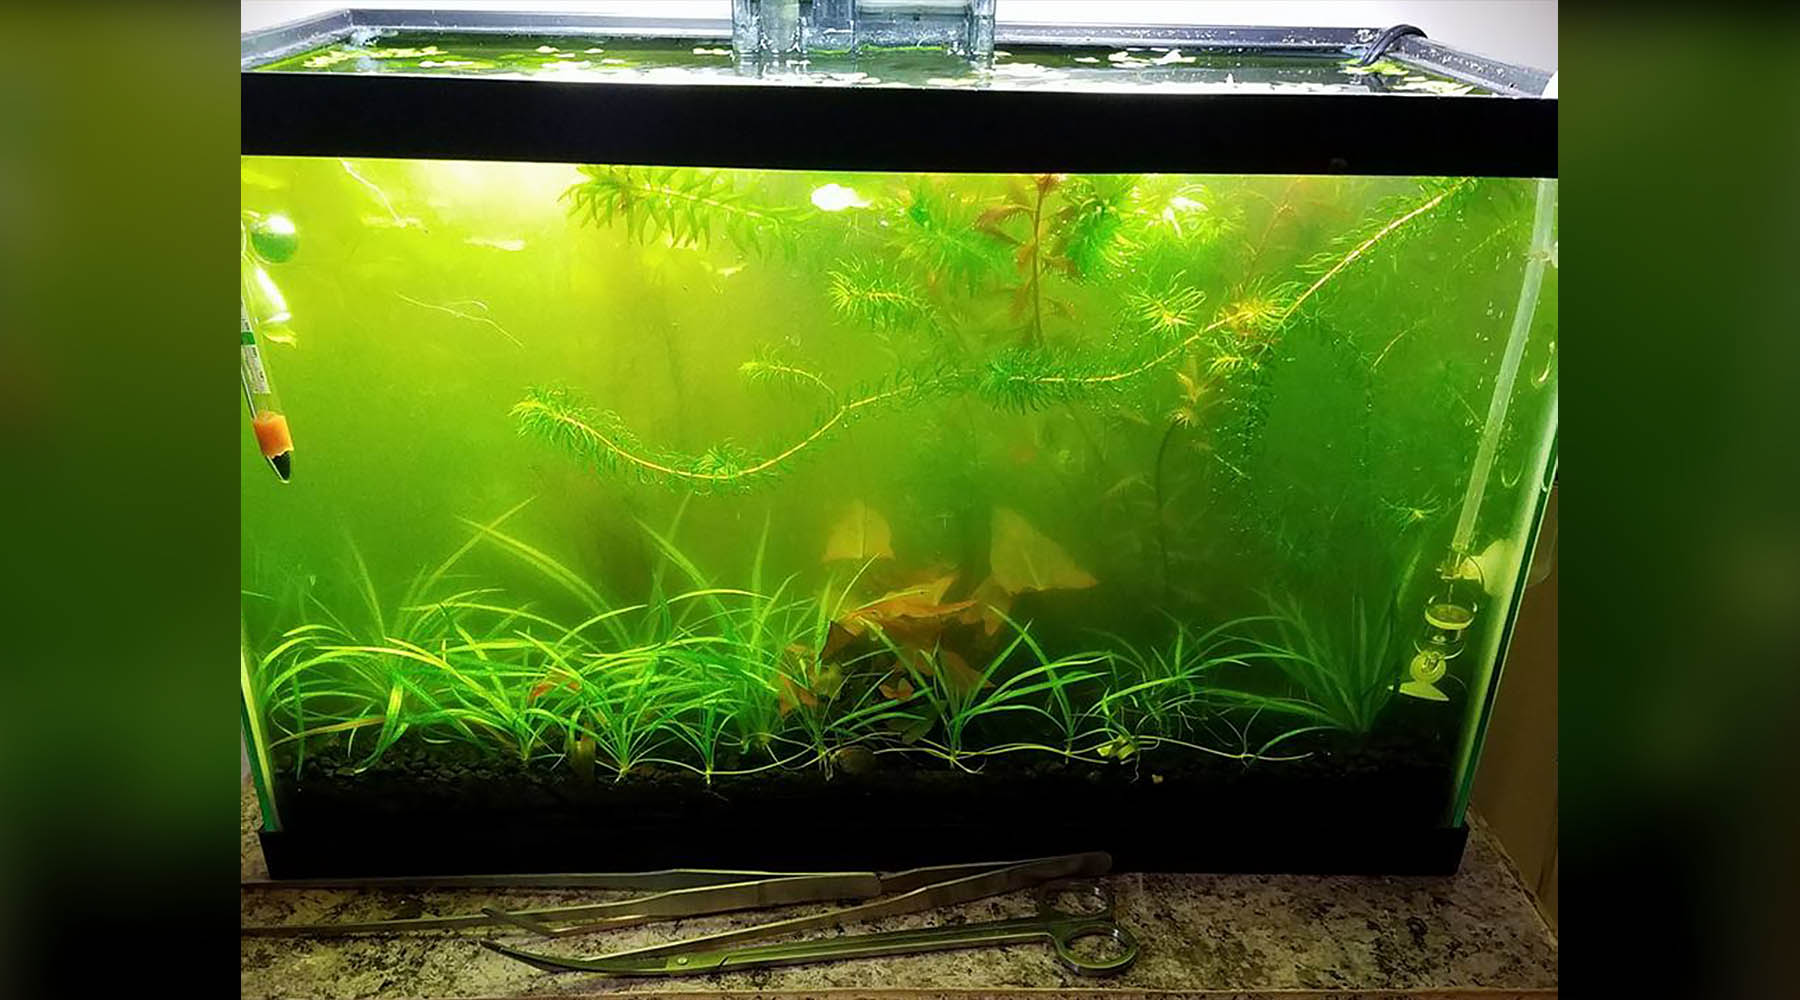 How to control Green water algae in a planted tank